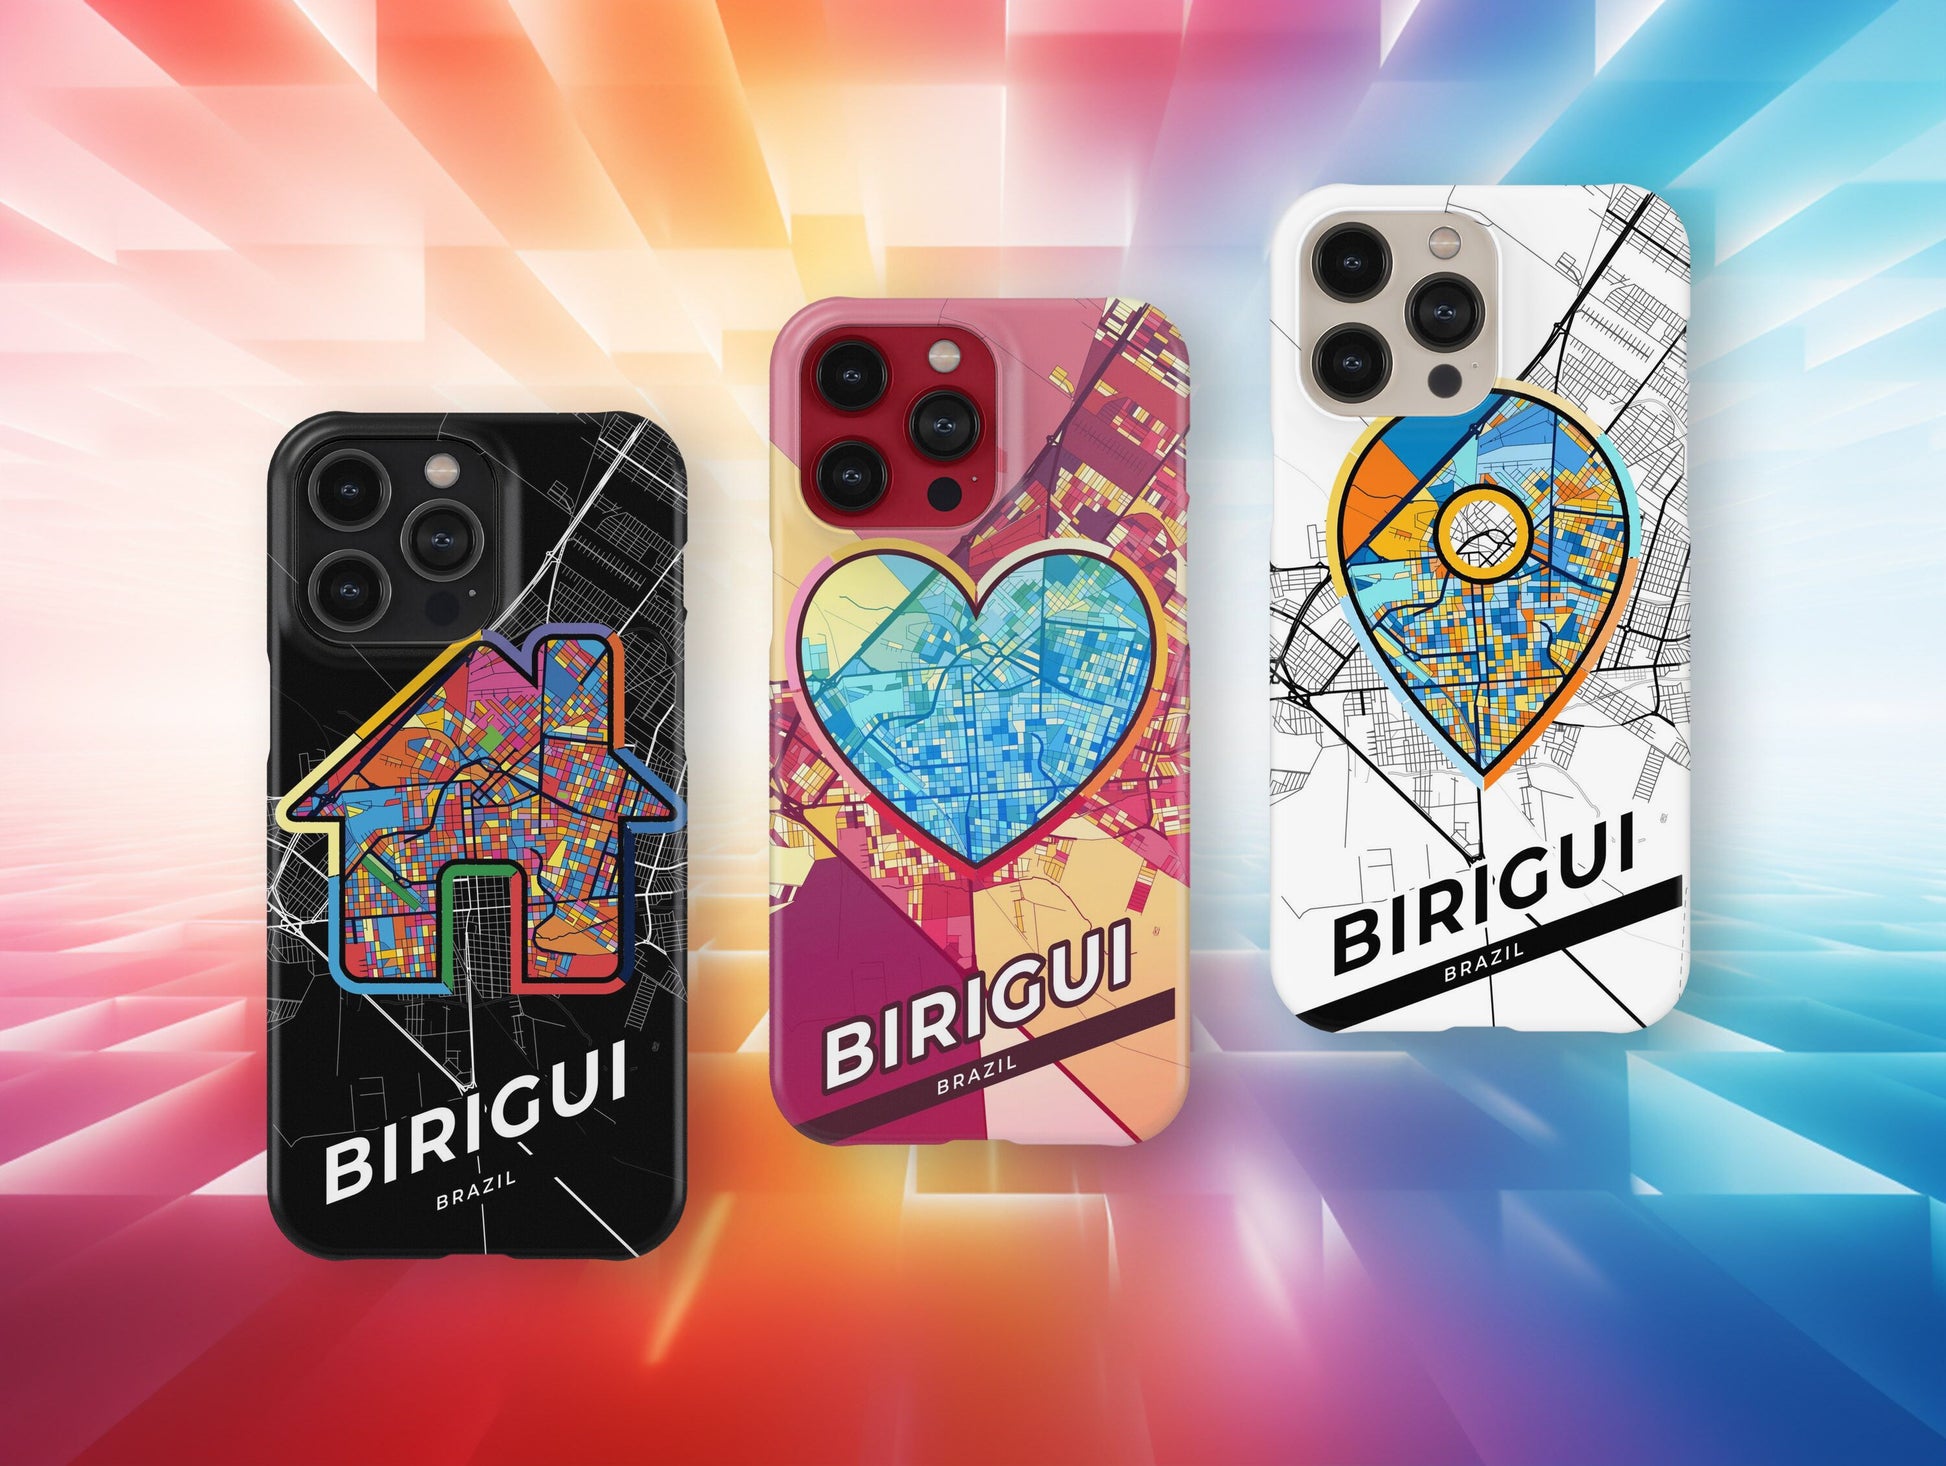 Birigui Brazil slim phone case with colorful icon. Birthday, wedding or housewarming gift. Couple match cases.